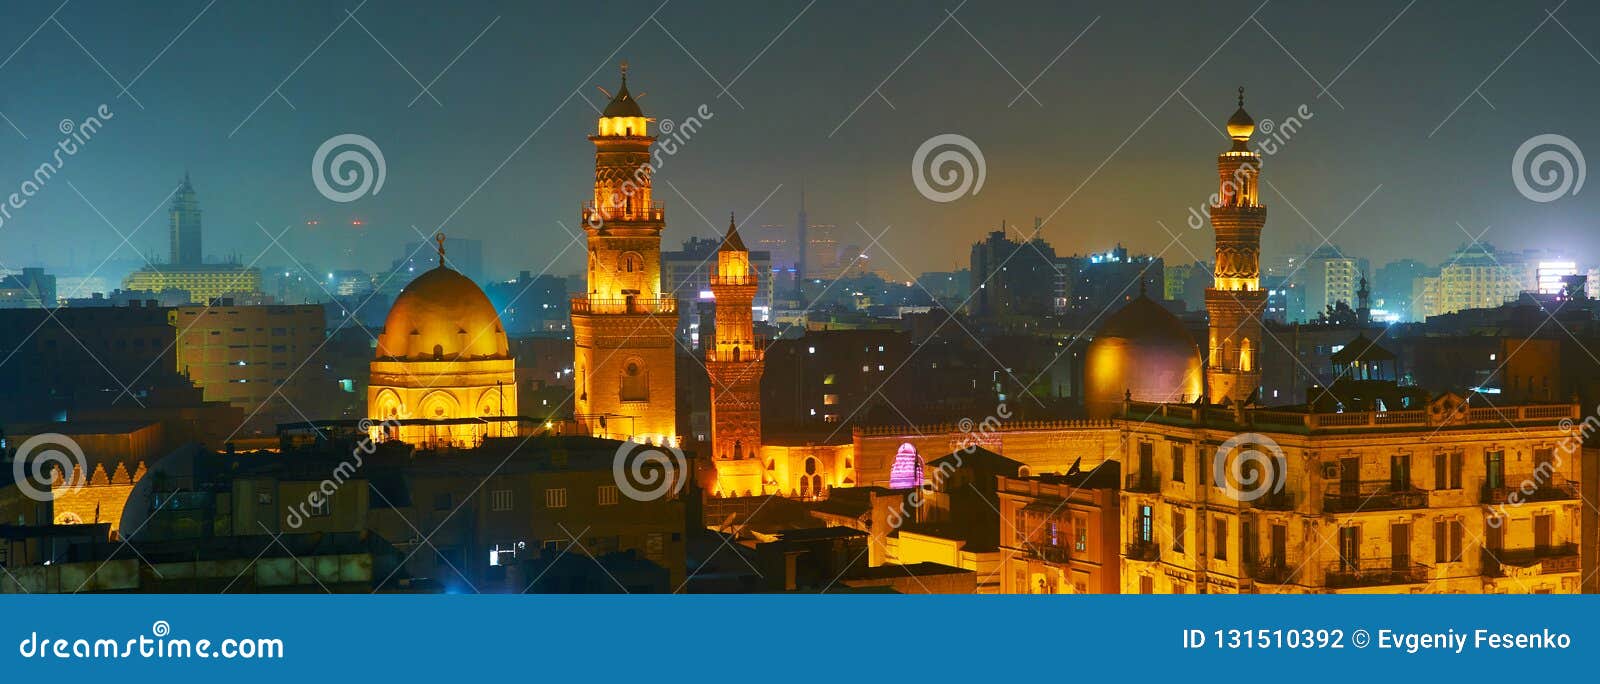 the brightly illuminated domes and minarets of sultan qalawun, al moez and elzaher barqooq mosques in dark evening sky of cairo,